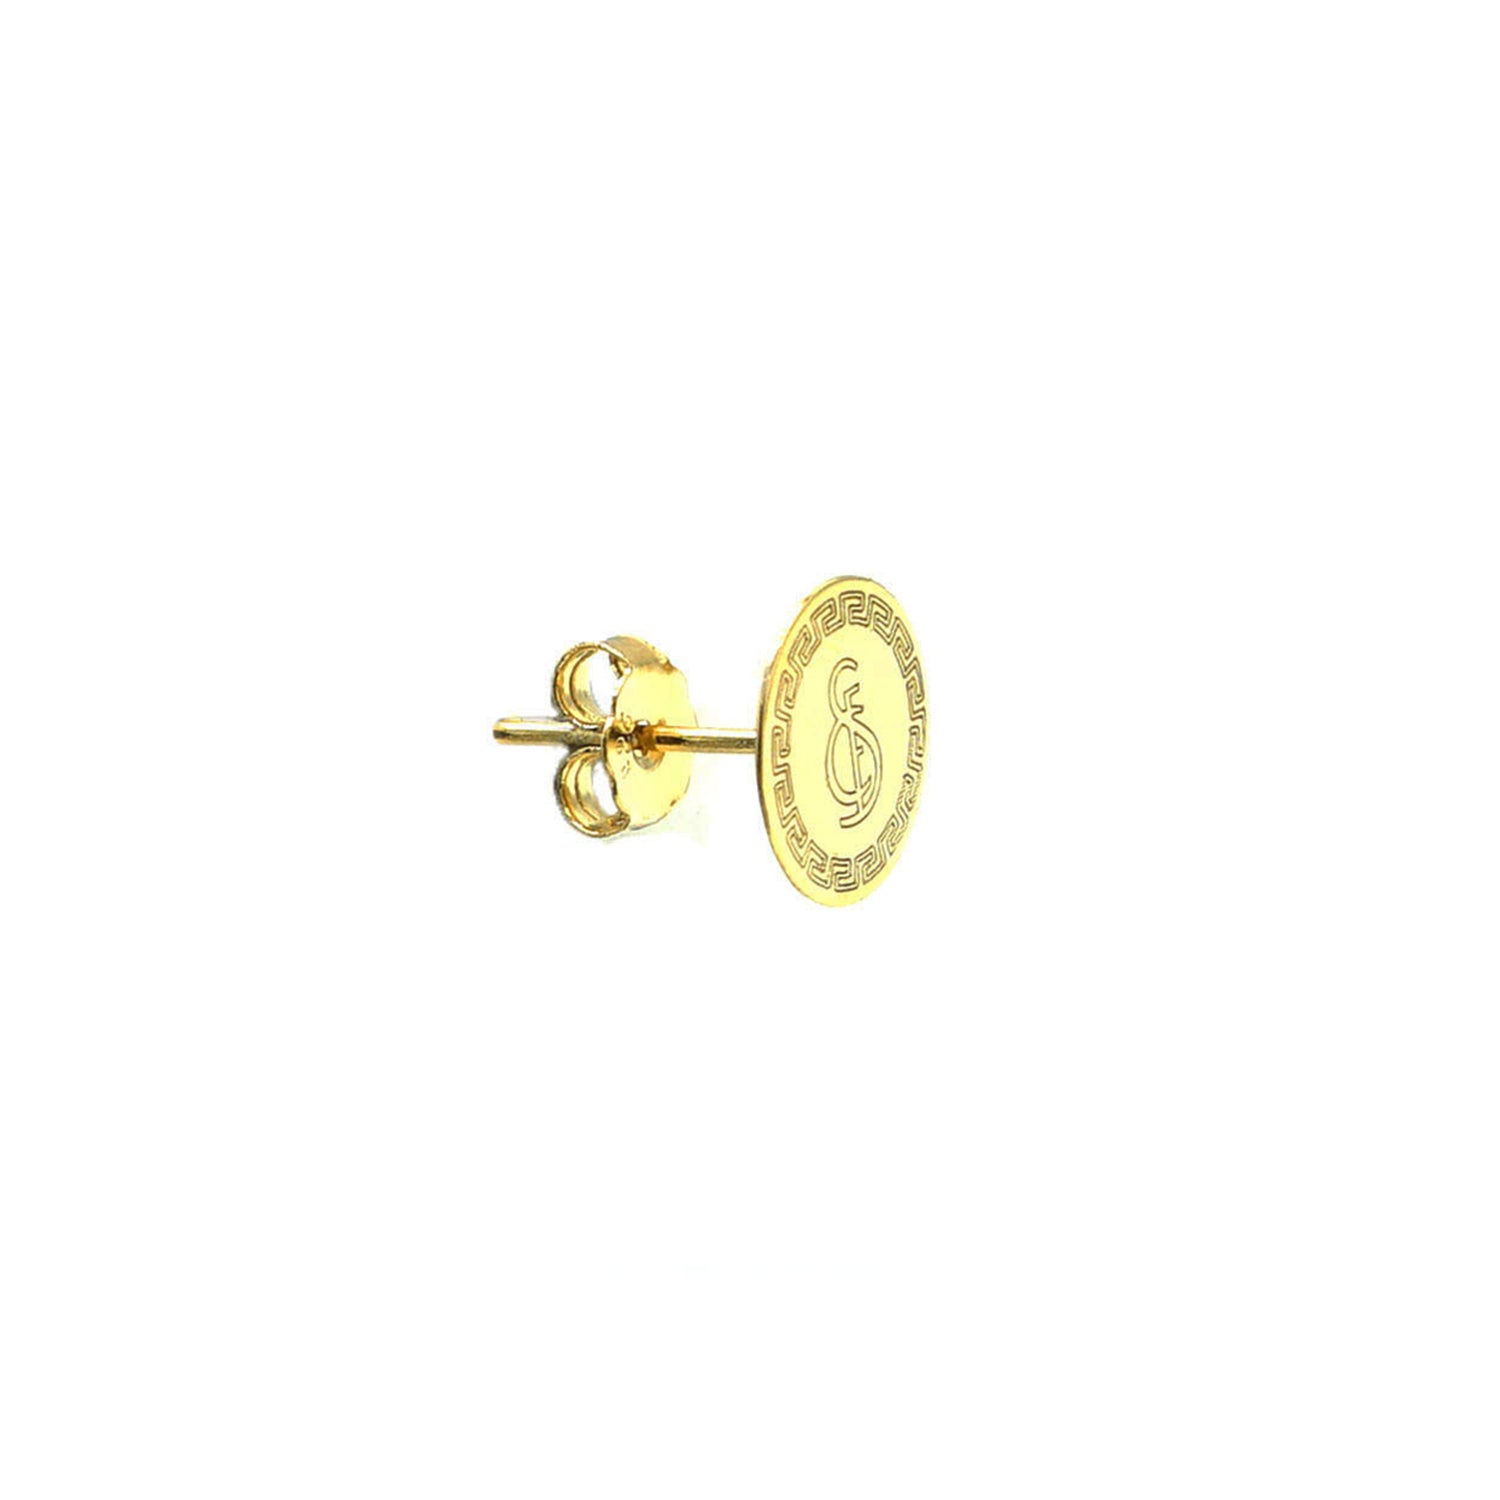 SFC gold plated silver earrings